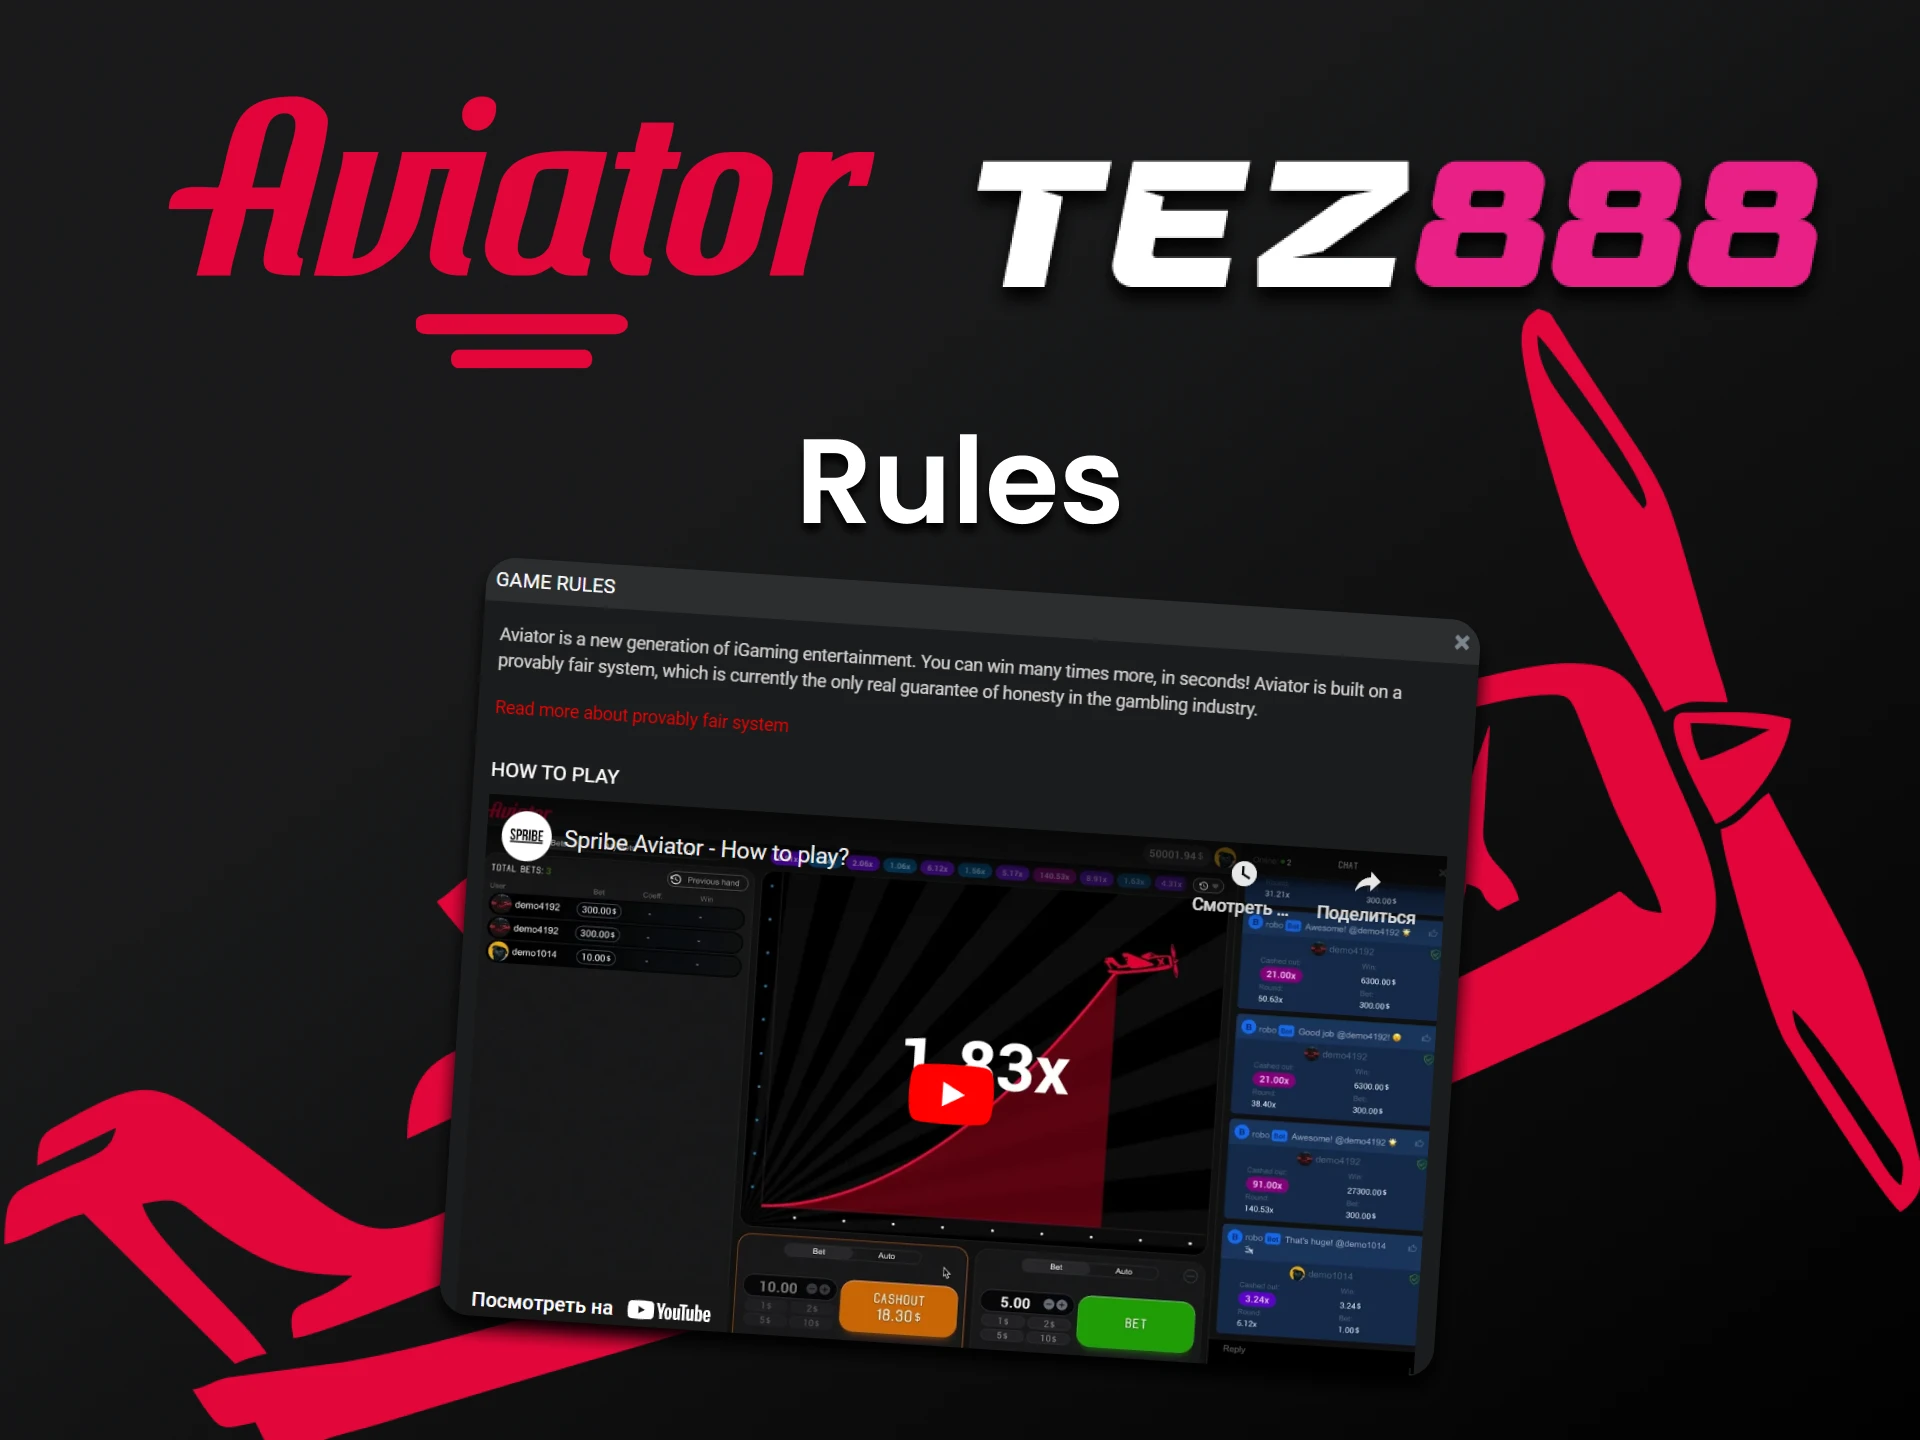 Carefully study the rules of the Aviator game on Tez888.